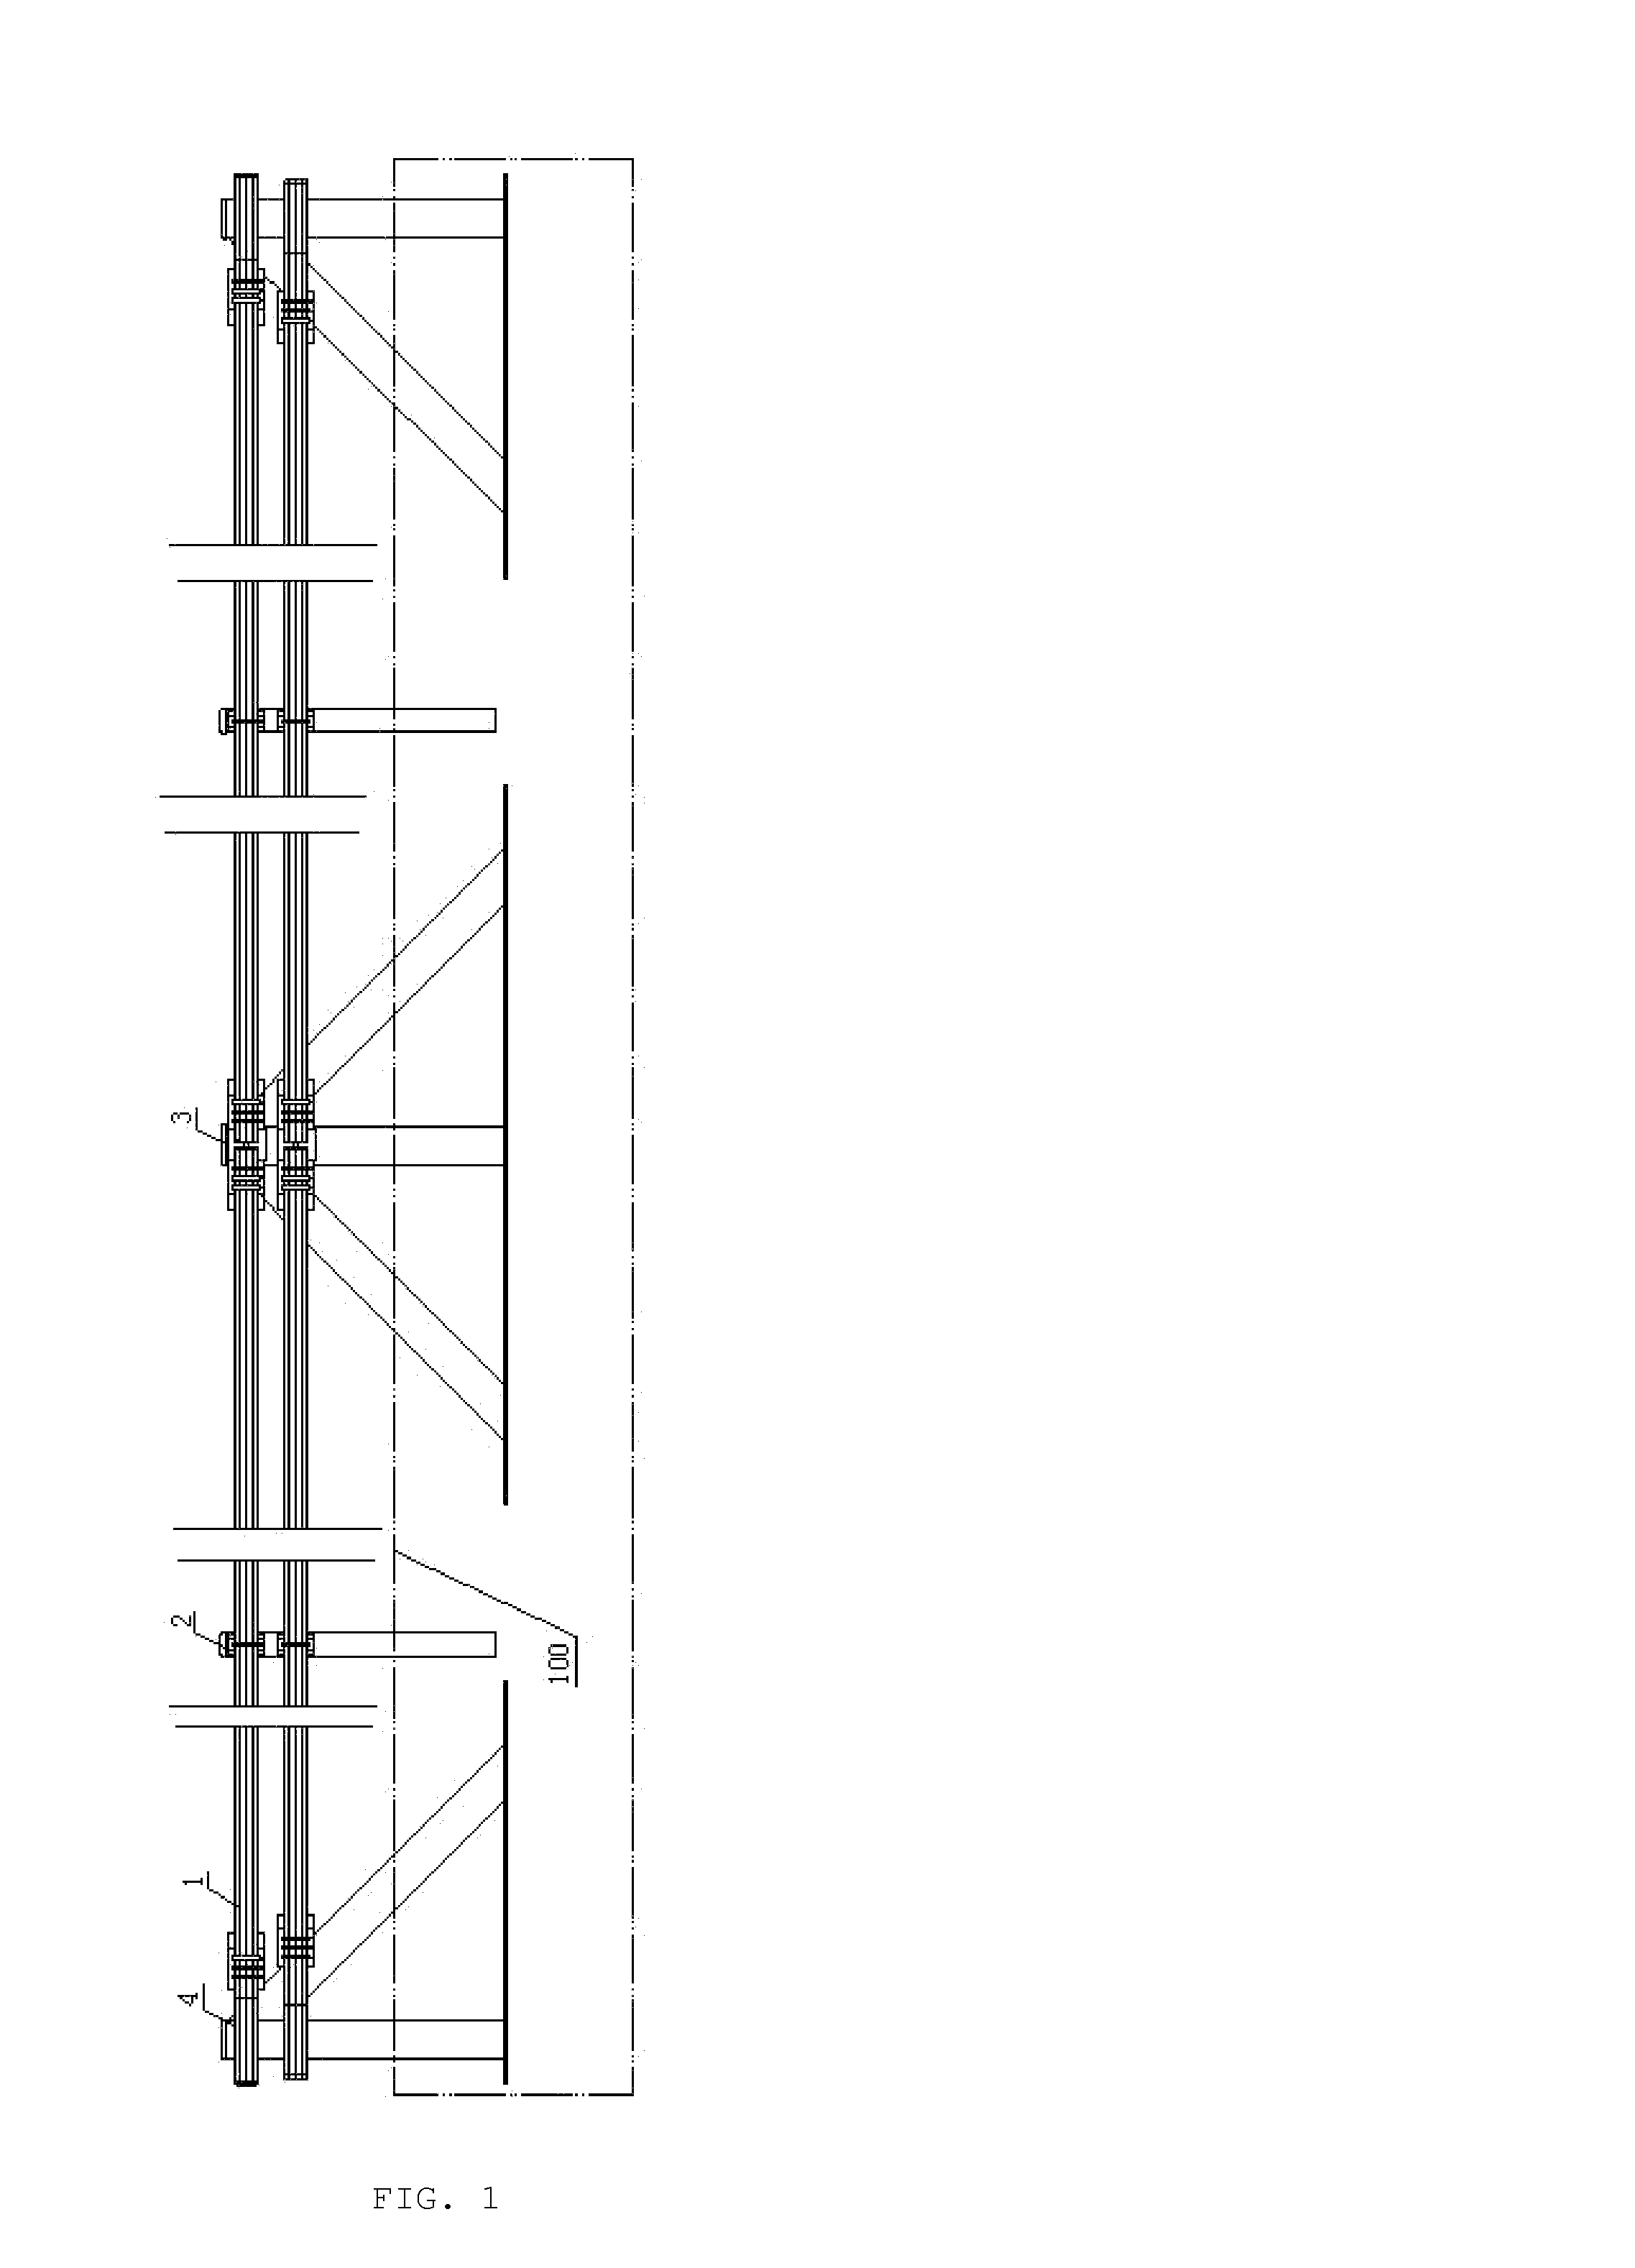 Guardrail device for highway